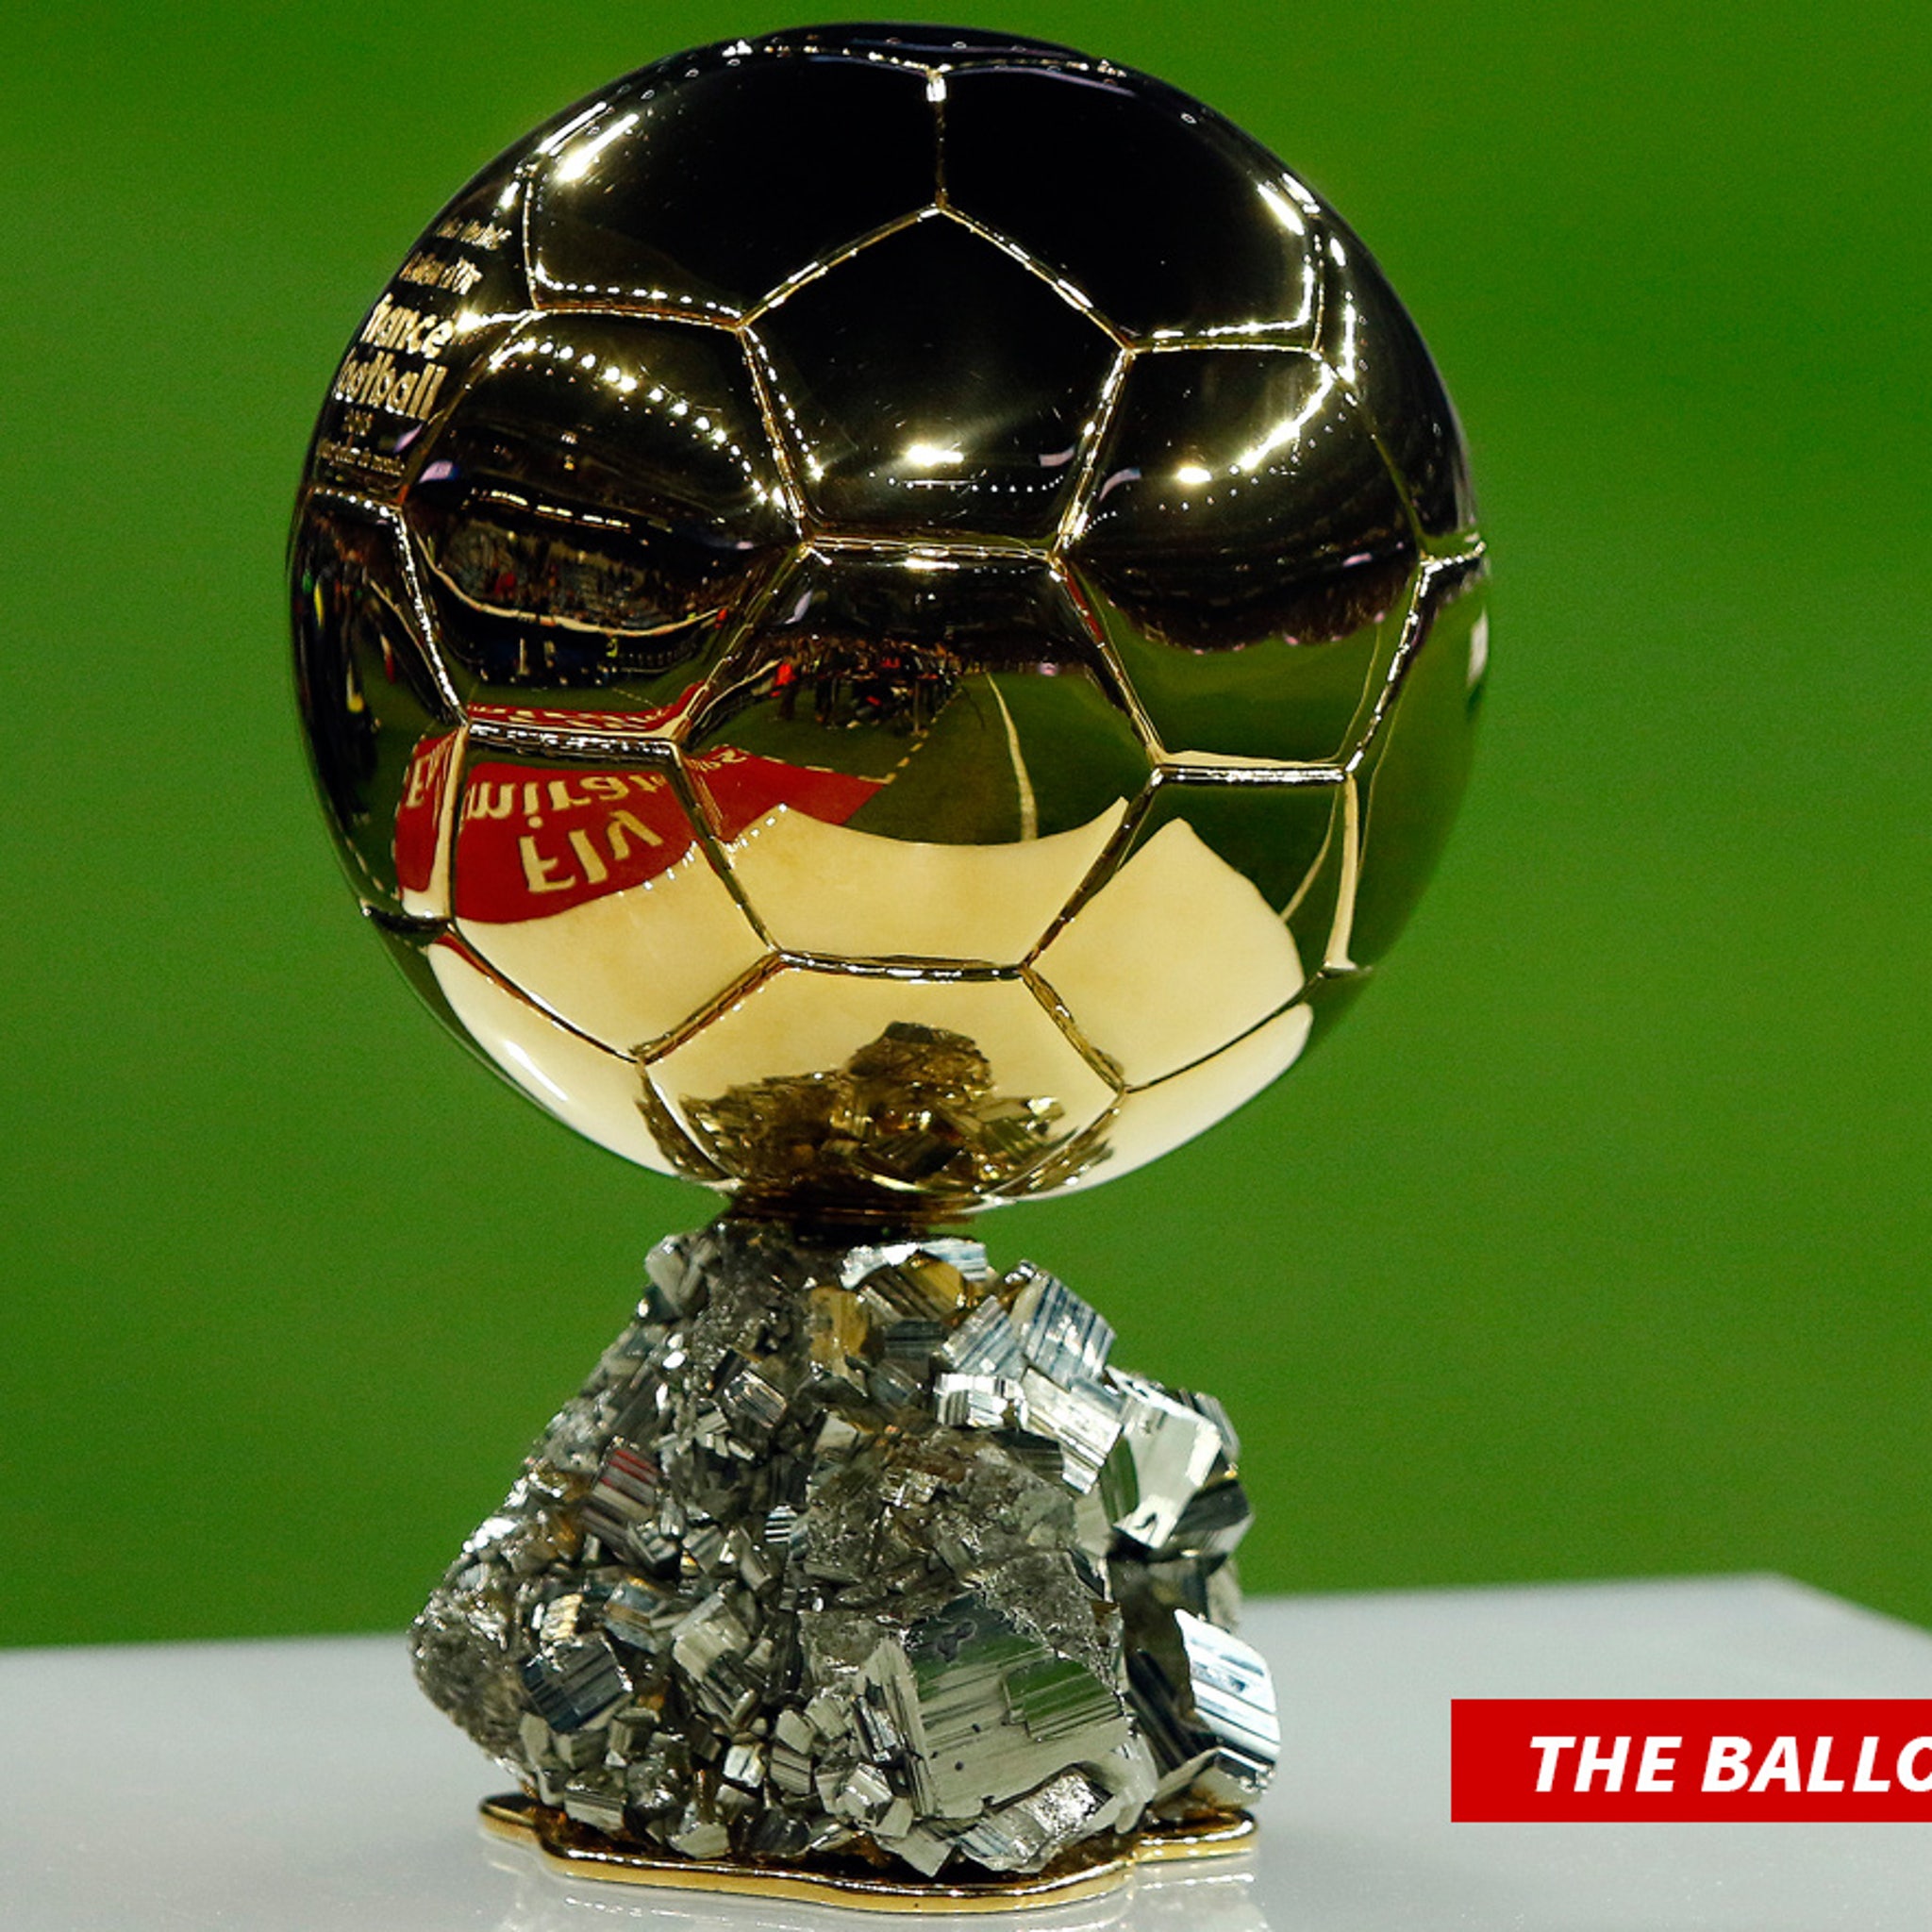 The Ballon d'Or will not be awarded in 2020. : r/soccer